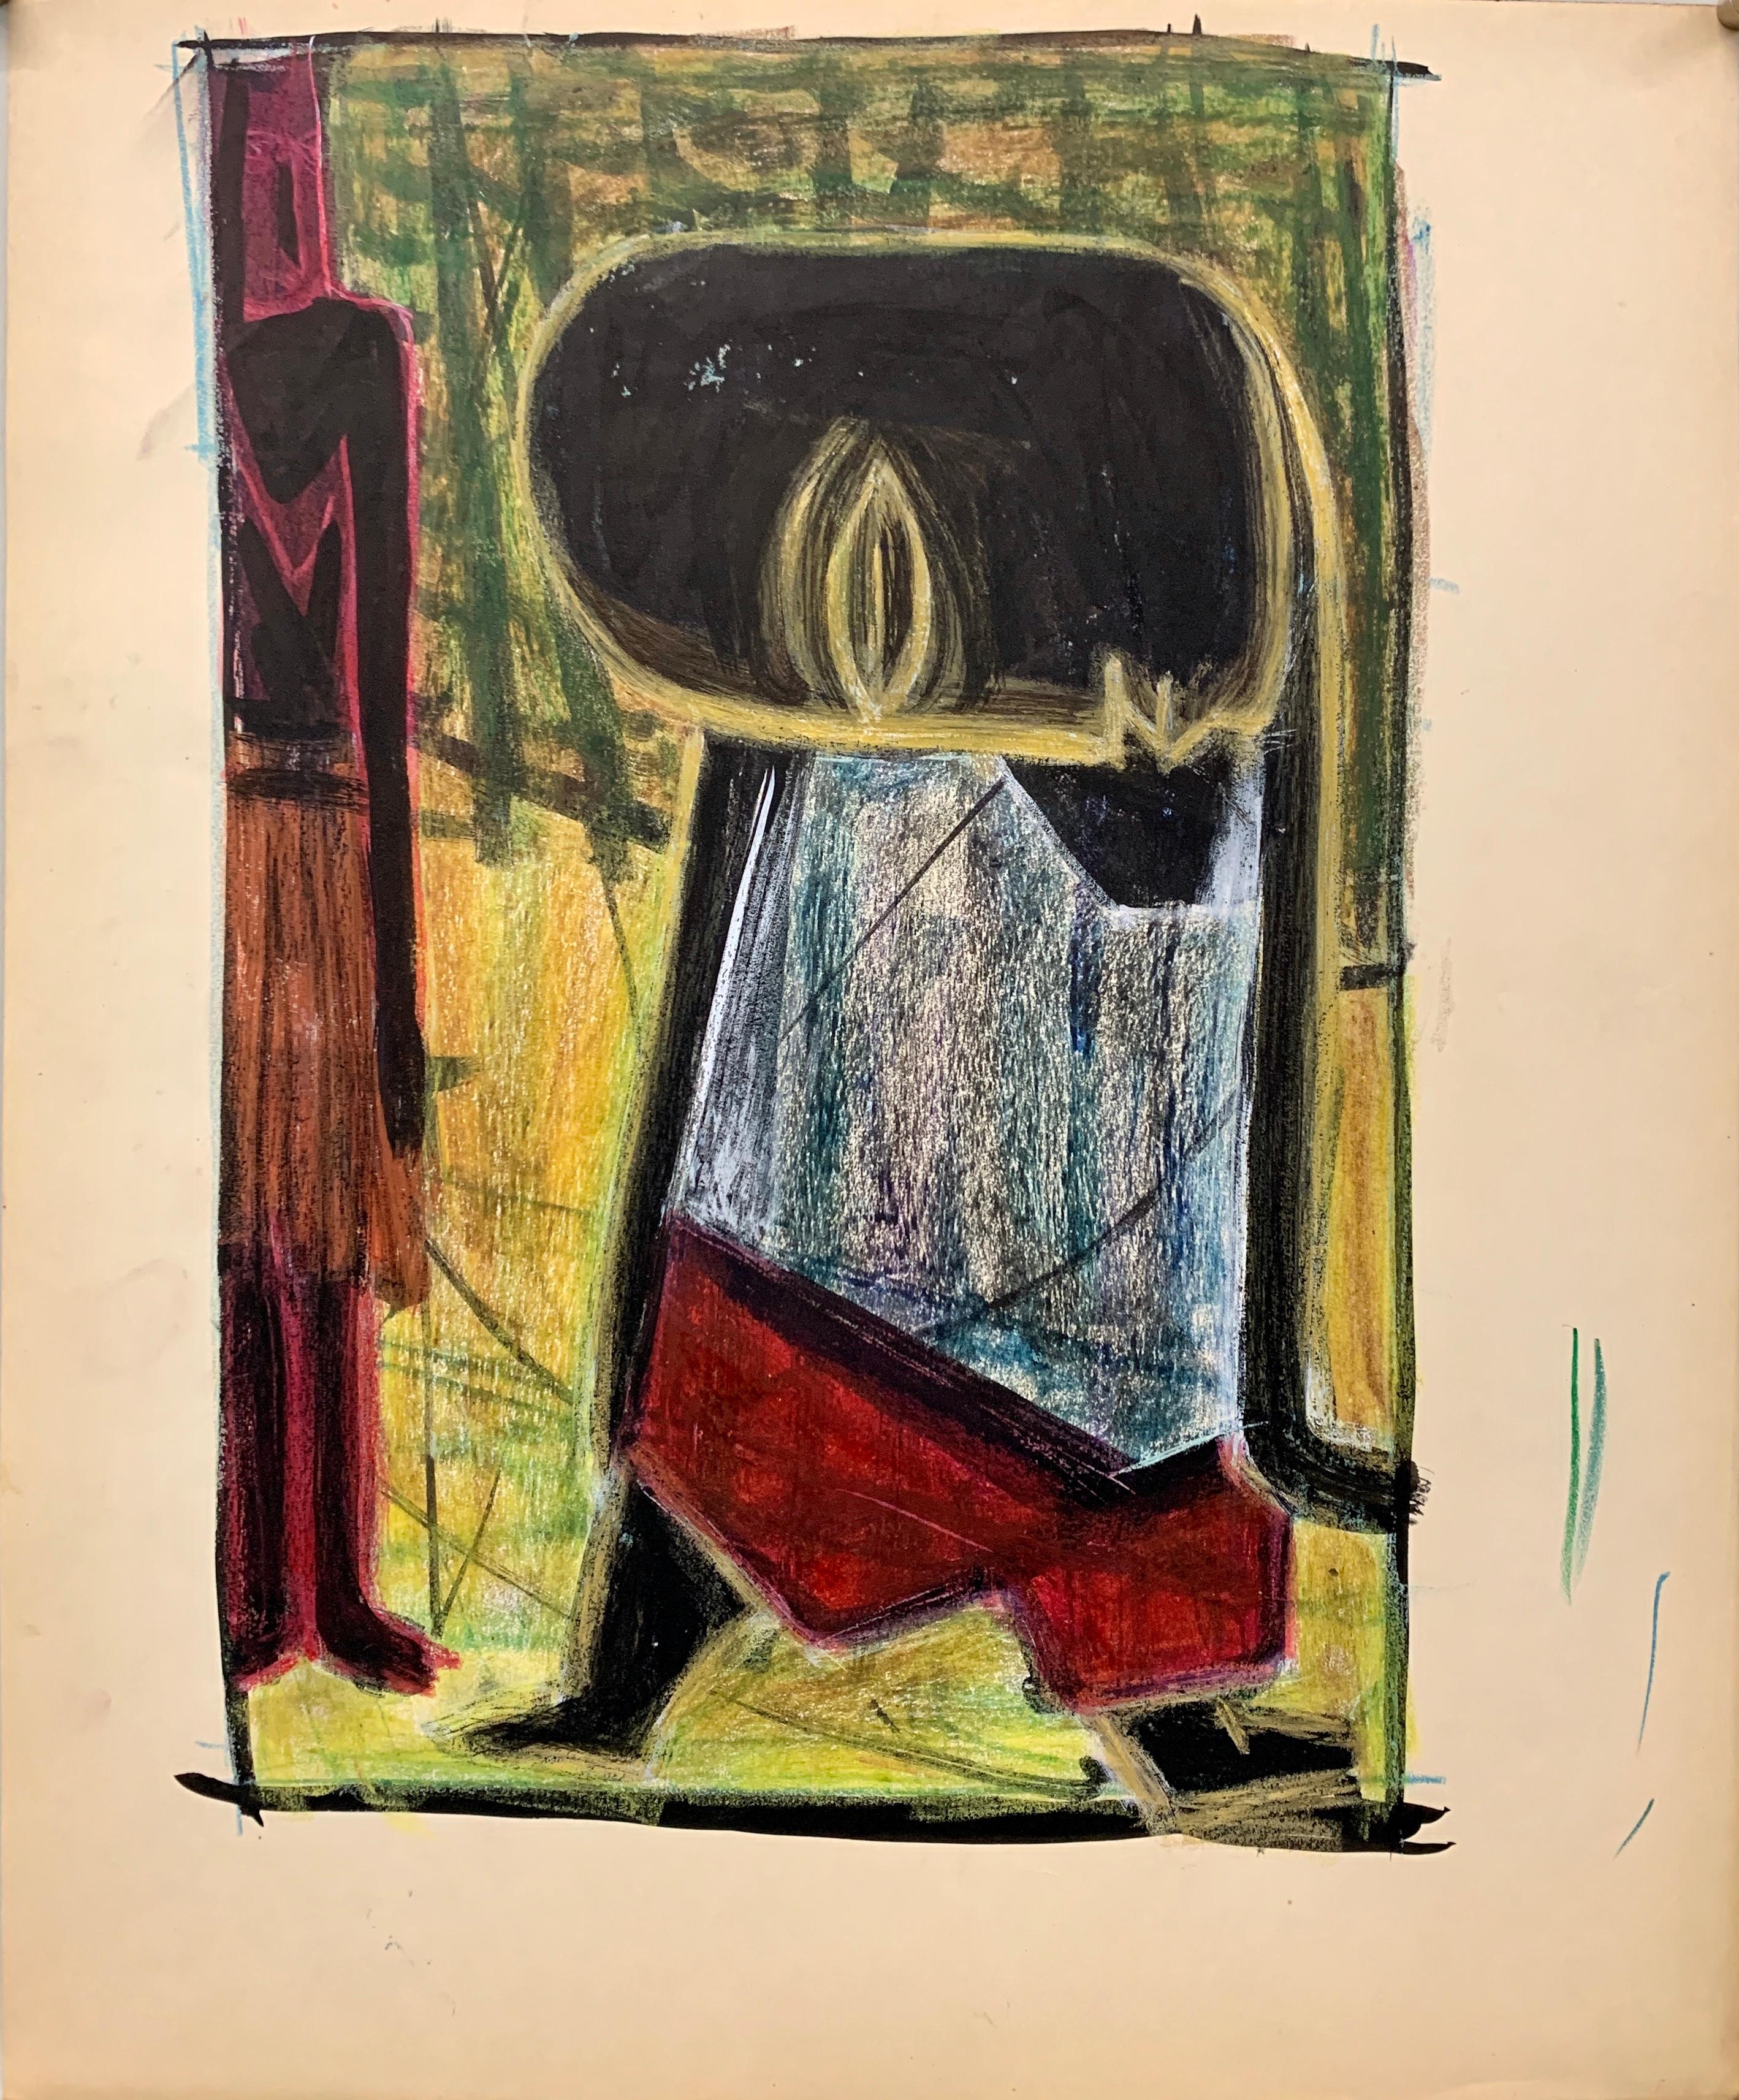 Donald Stacy Figurative Art - 1950s "Mark" Oil Pastel and Gouache Figurative Painting NYC Modern Mid Century